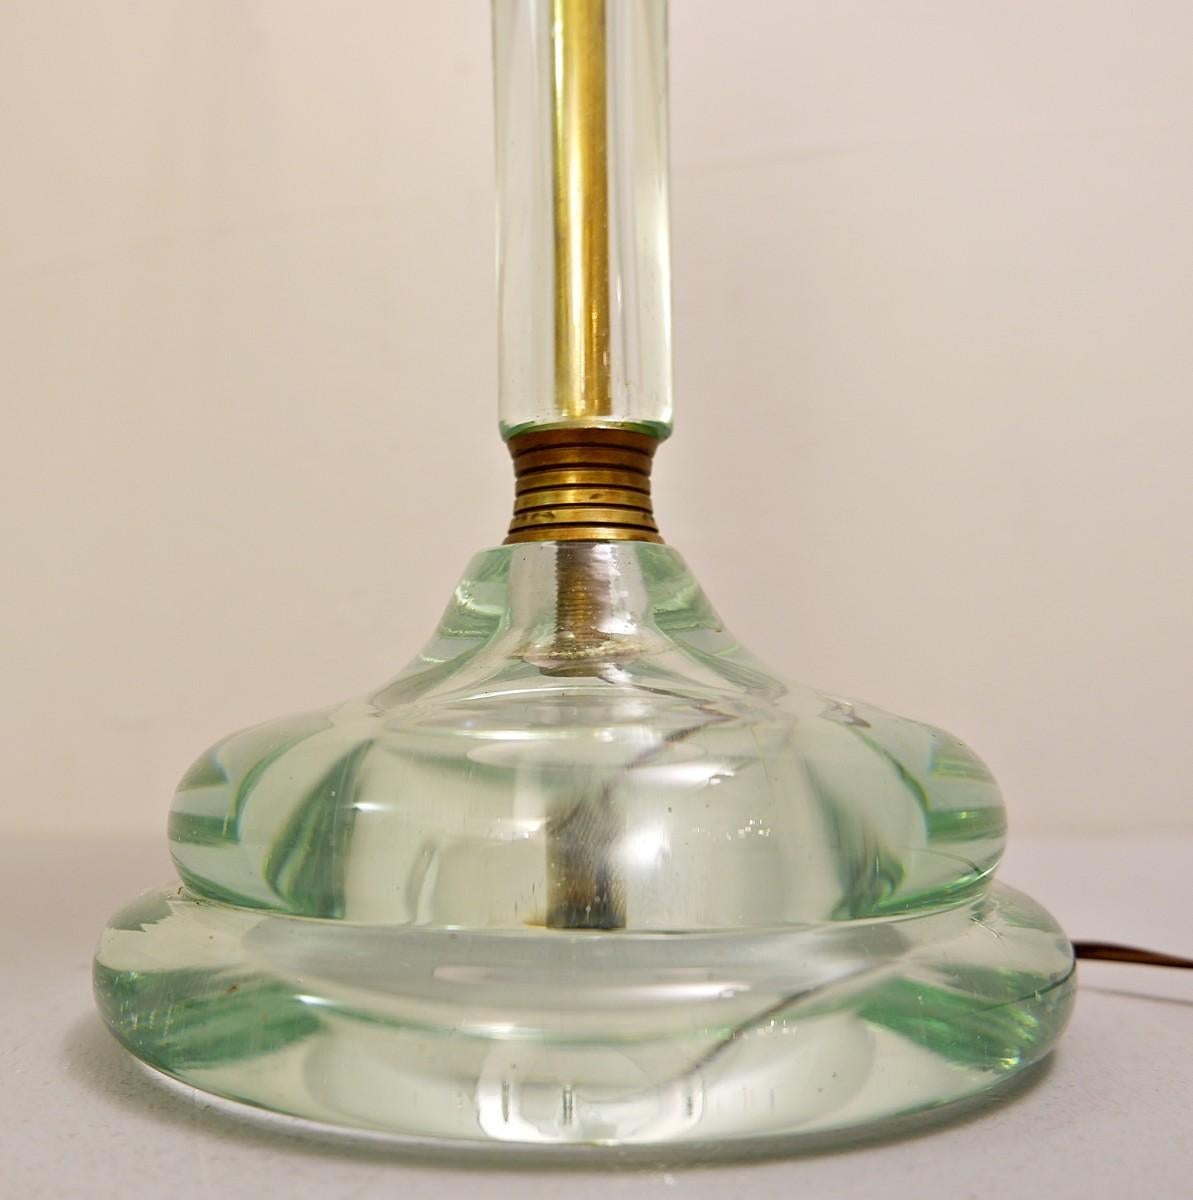 Glass table lamp from Seguso, 1940s.